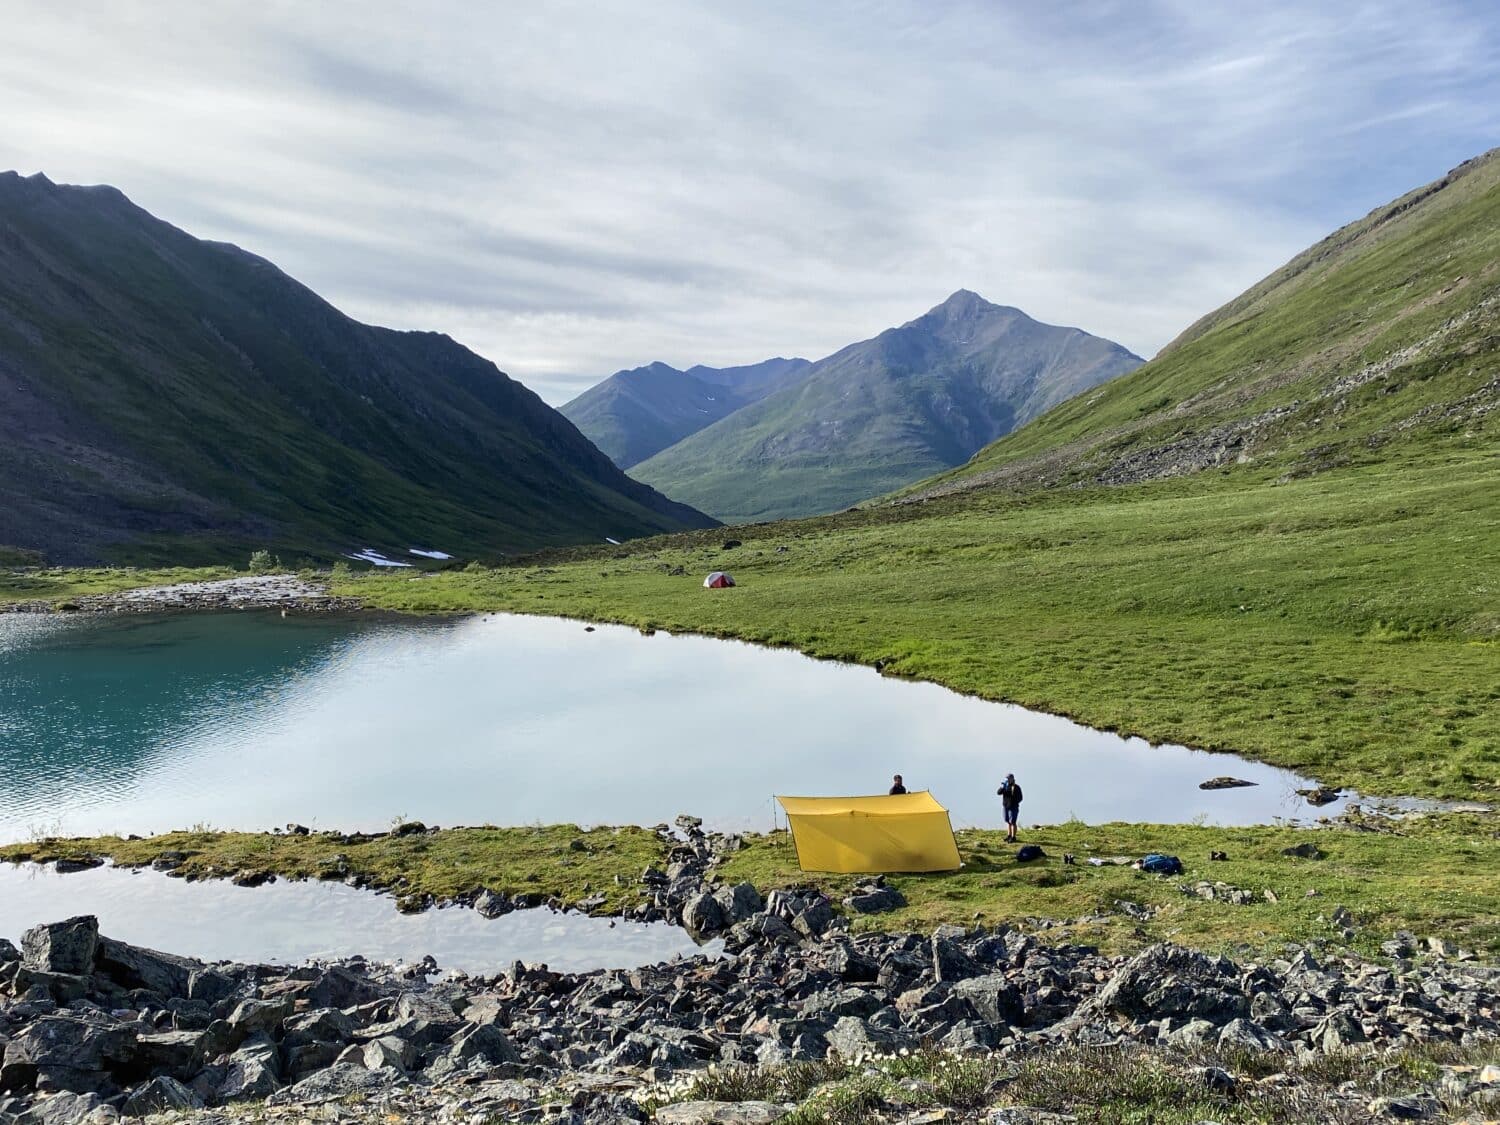 Beautiful camp near a lake in the Ogilvie Mountains